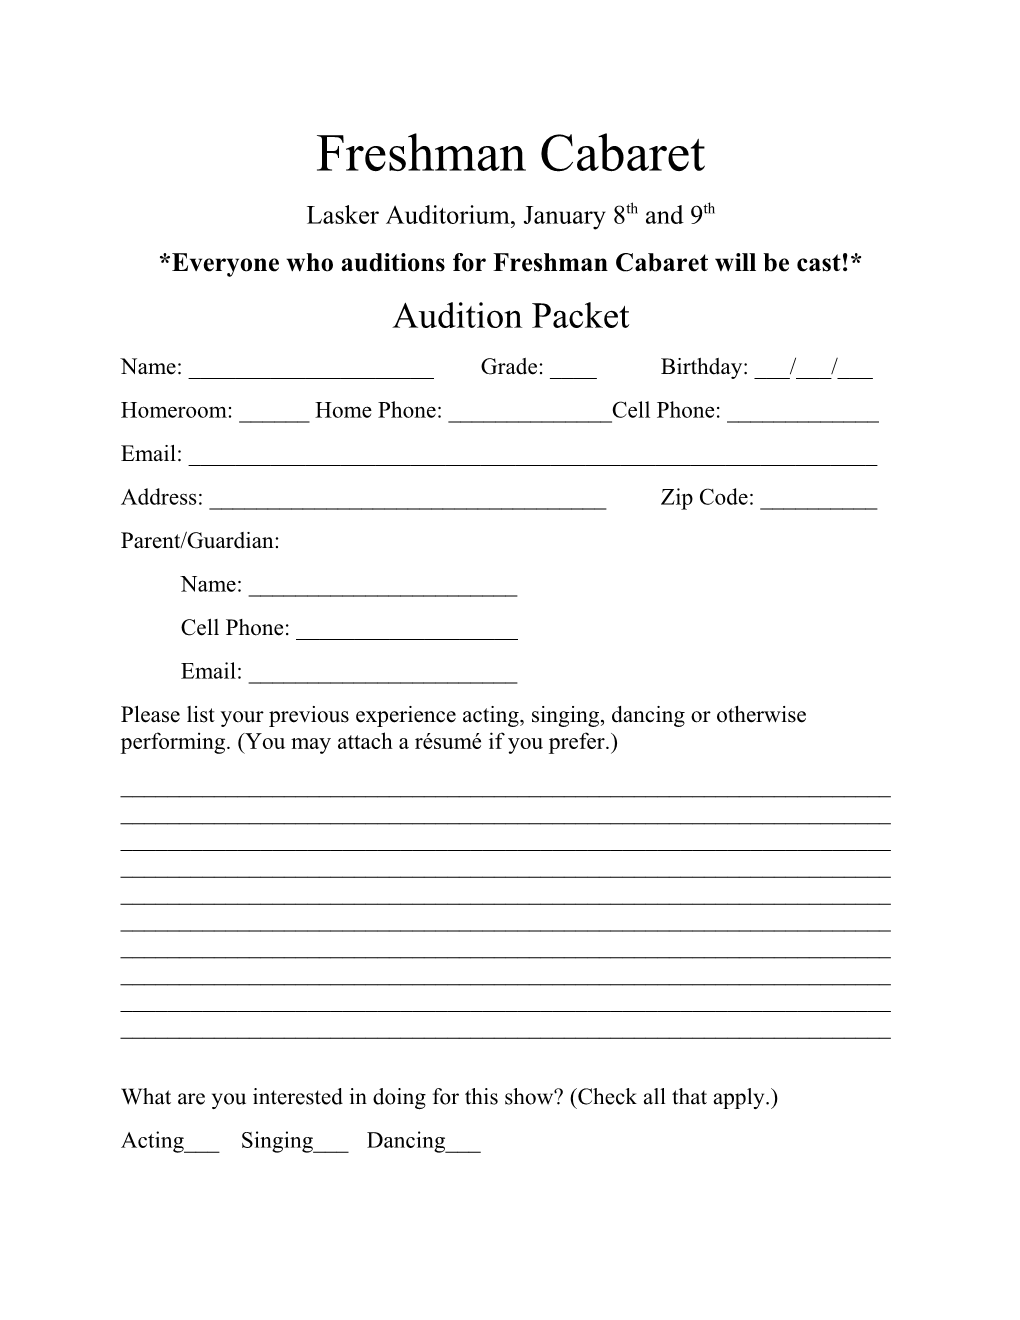 *Everyone Who Auditions for Freshman Cabaret Will Be Cast!*